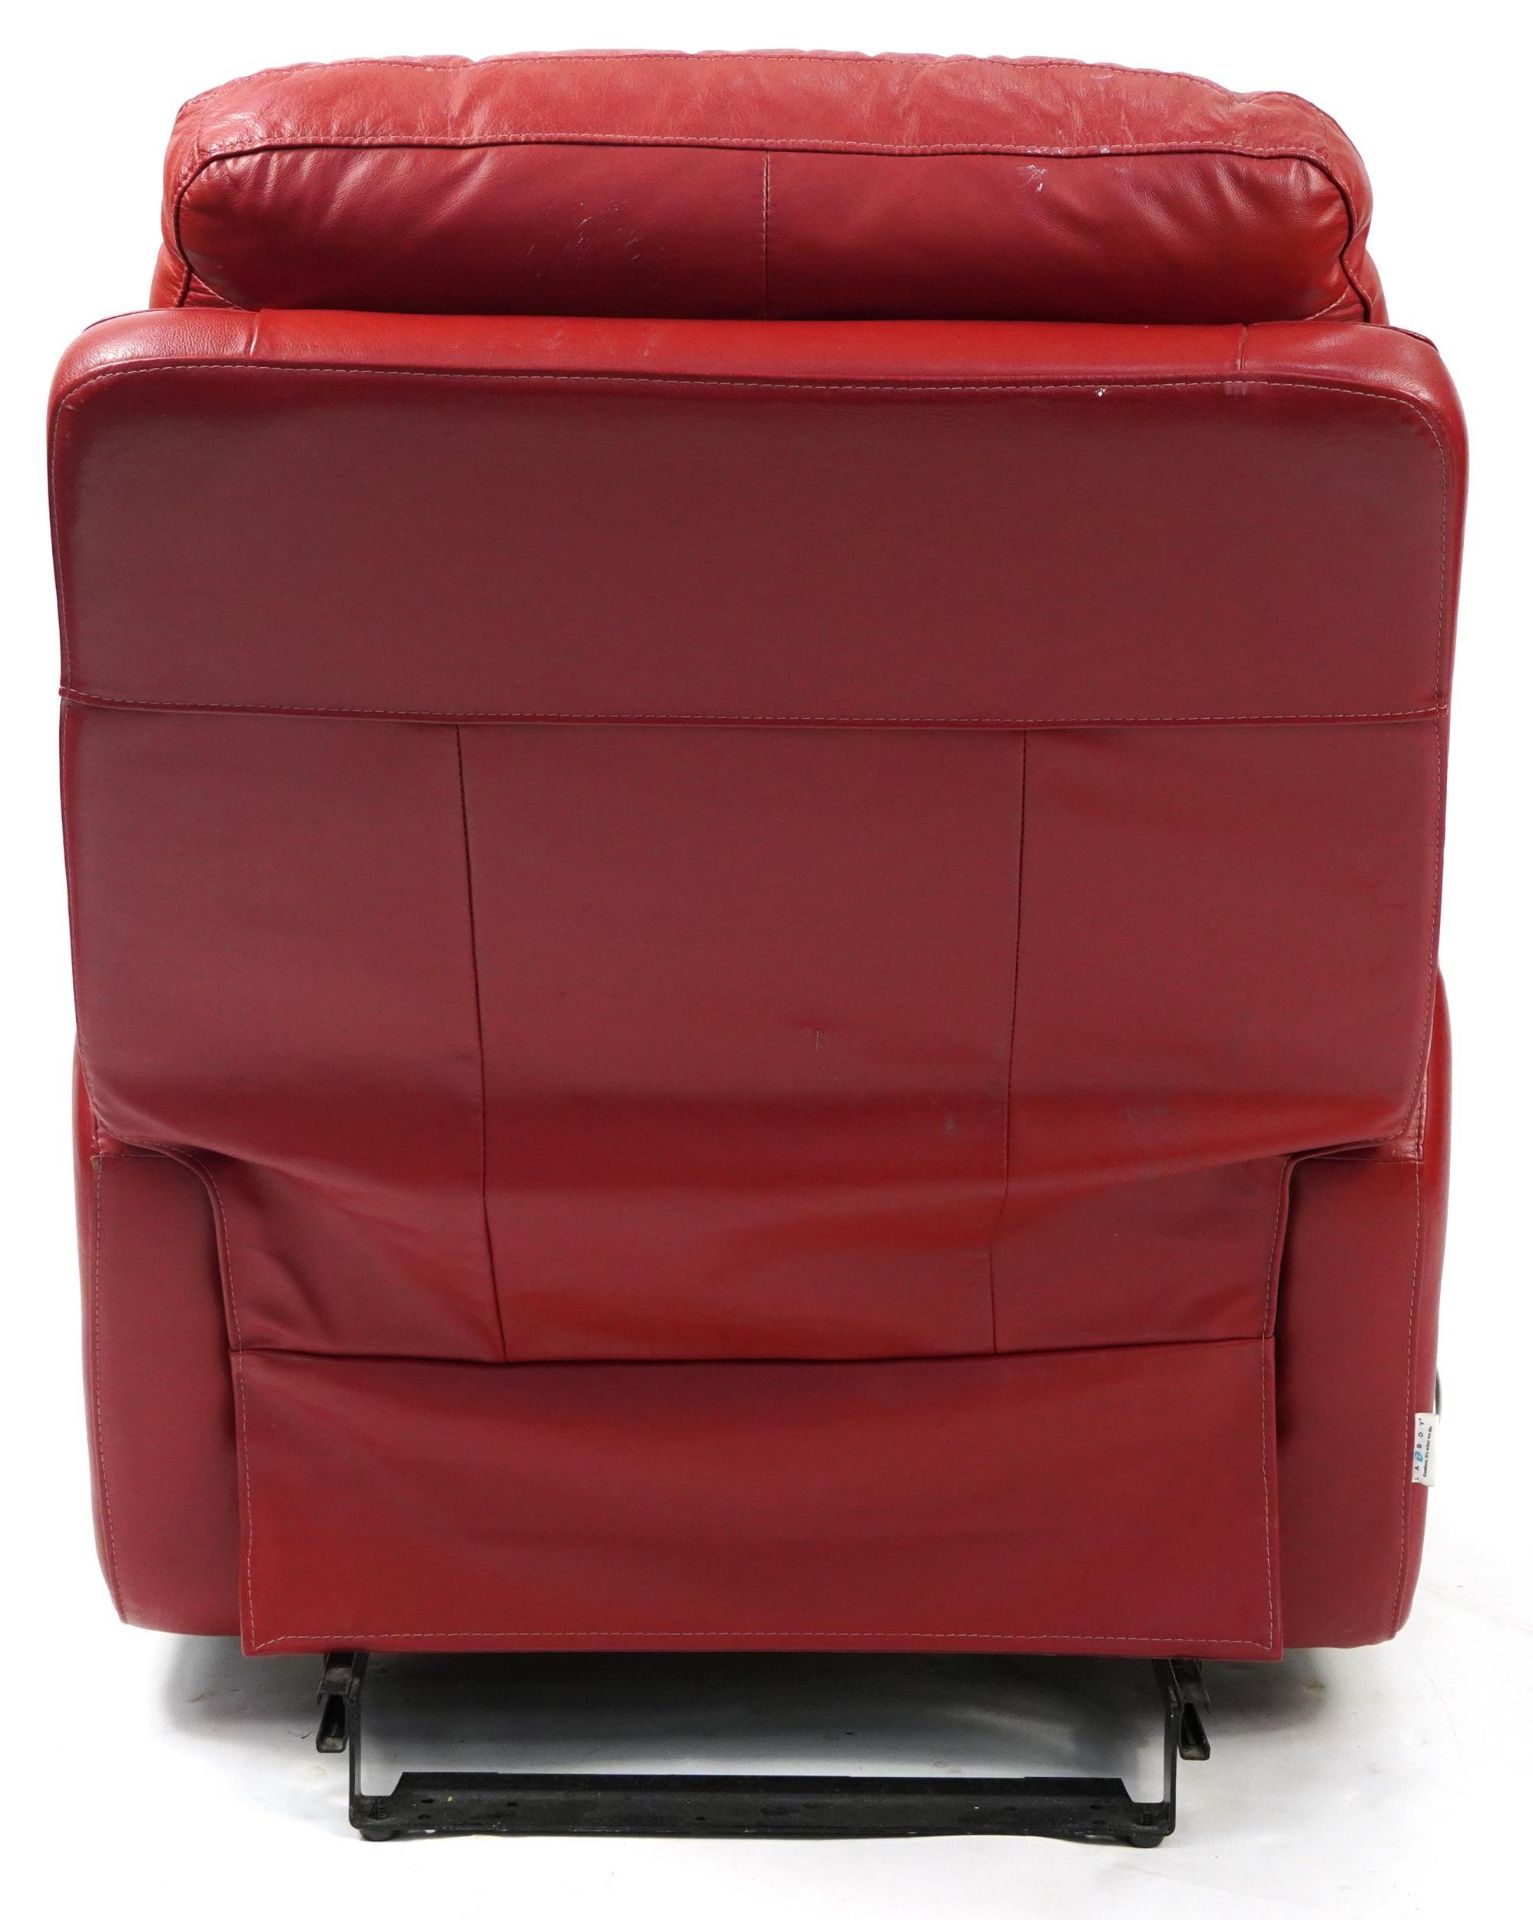 La-Z-Boy, contemporary red leather reclining armchair, 100cm high - Image 4 of 5